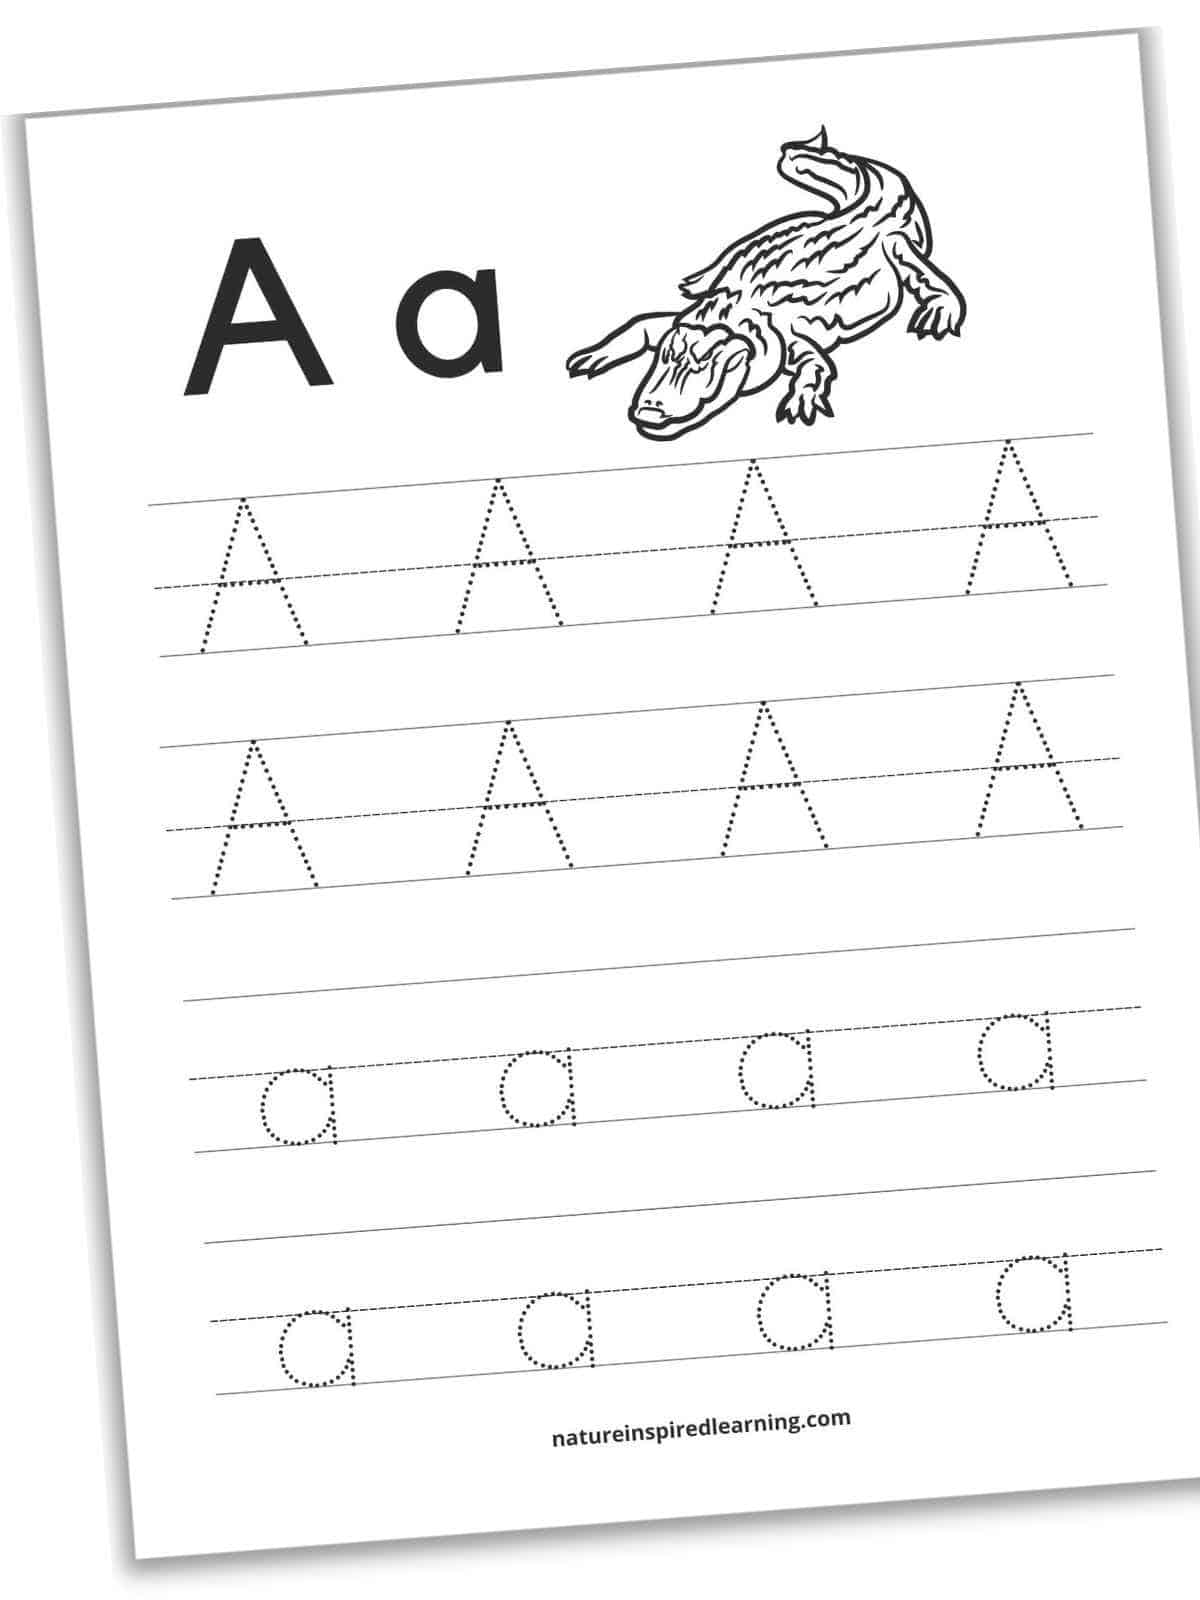 capital and lowercase letter A in bold across top with a black and white image of an alligator. Two rows with lines and dotted letter A along with two rows of lines with dotted letter a . Printable tilted with a drop shaddow.